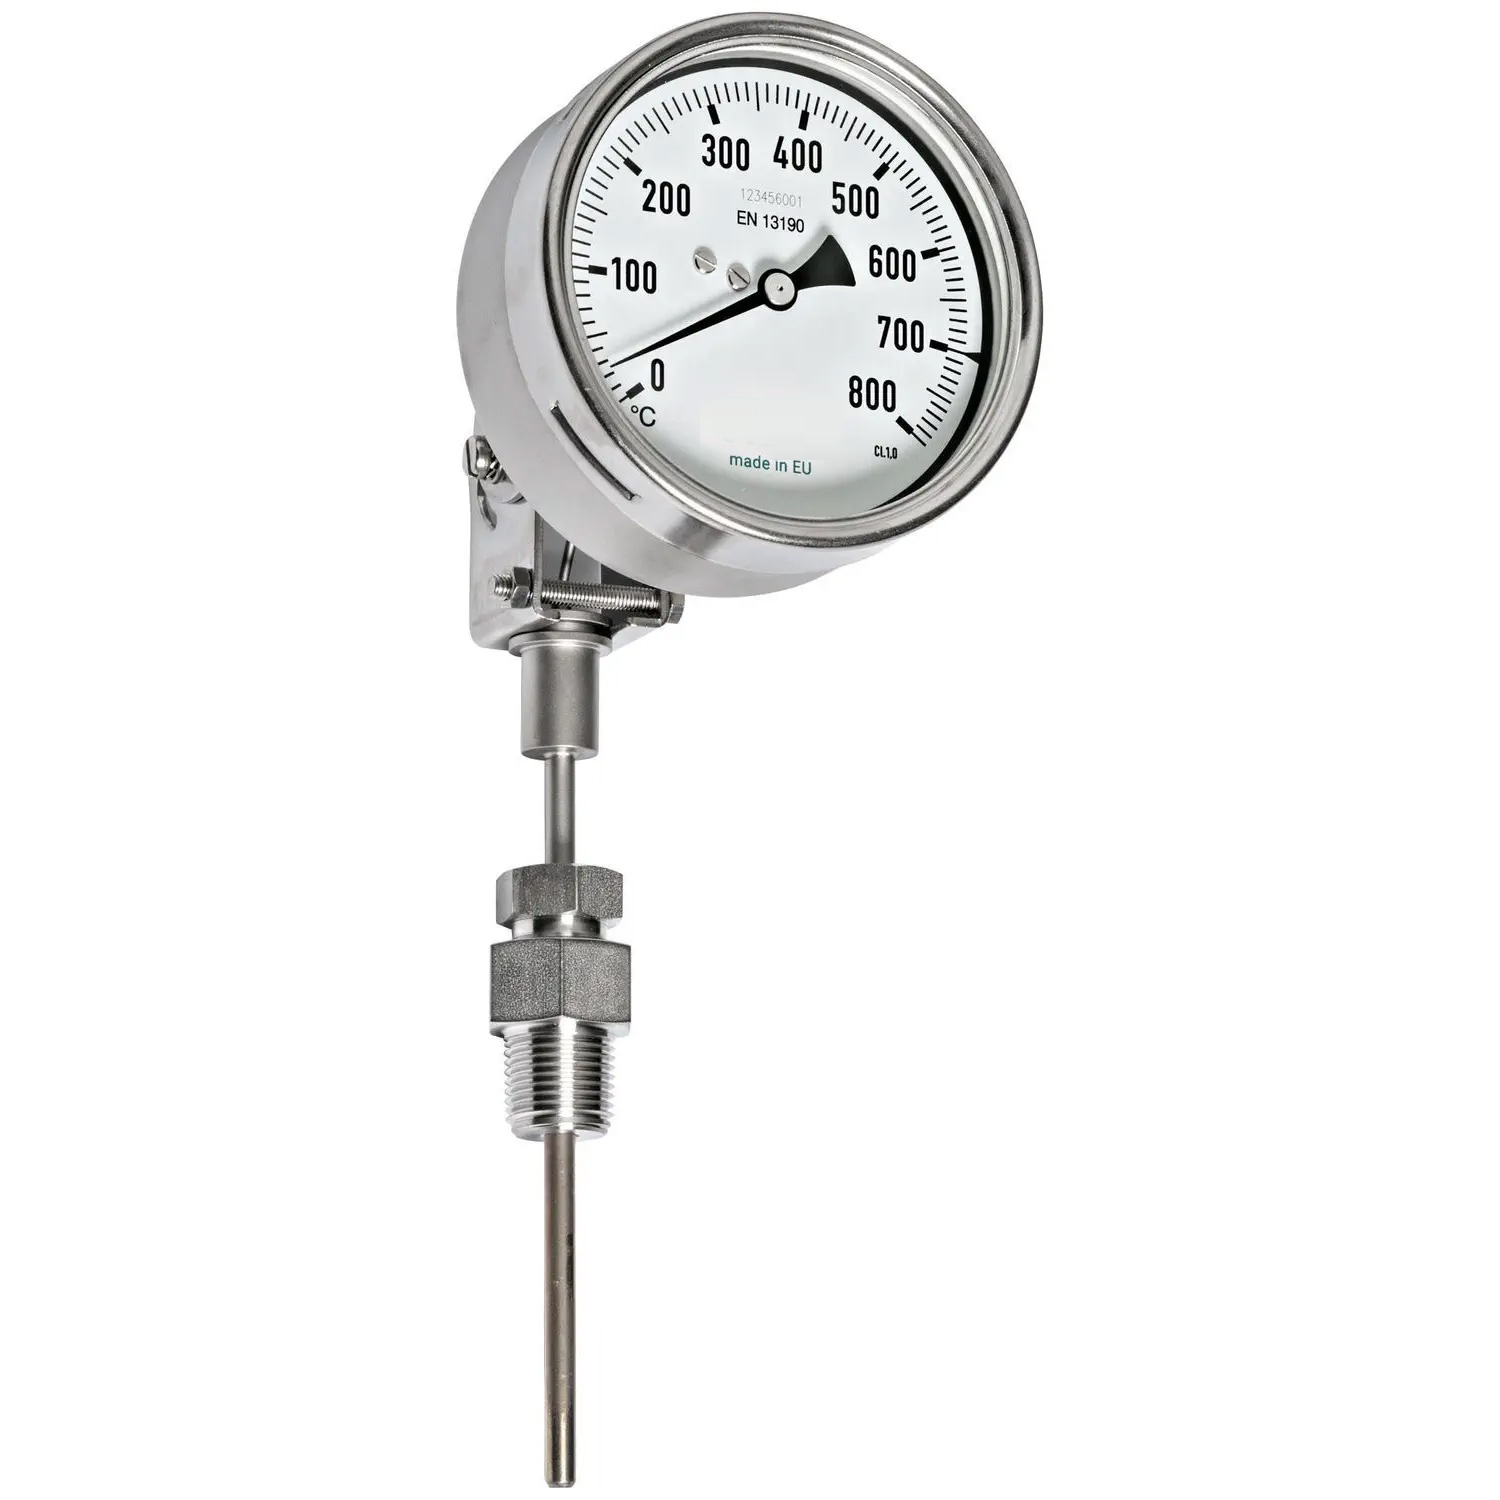 Analog diesel exhaust thermometer